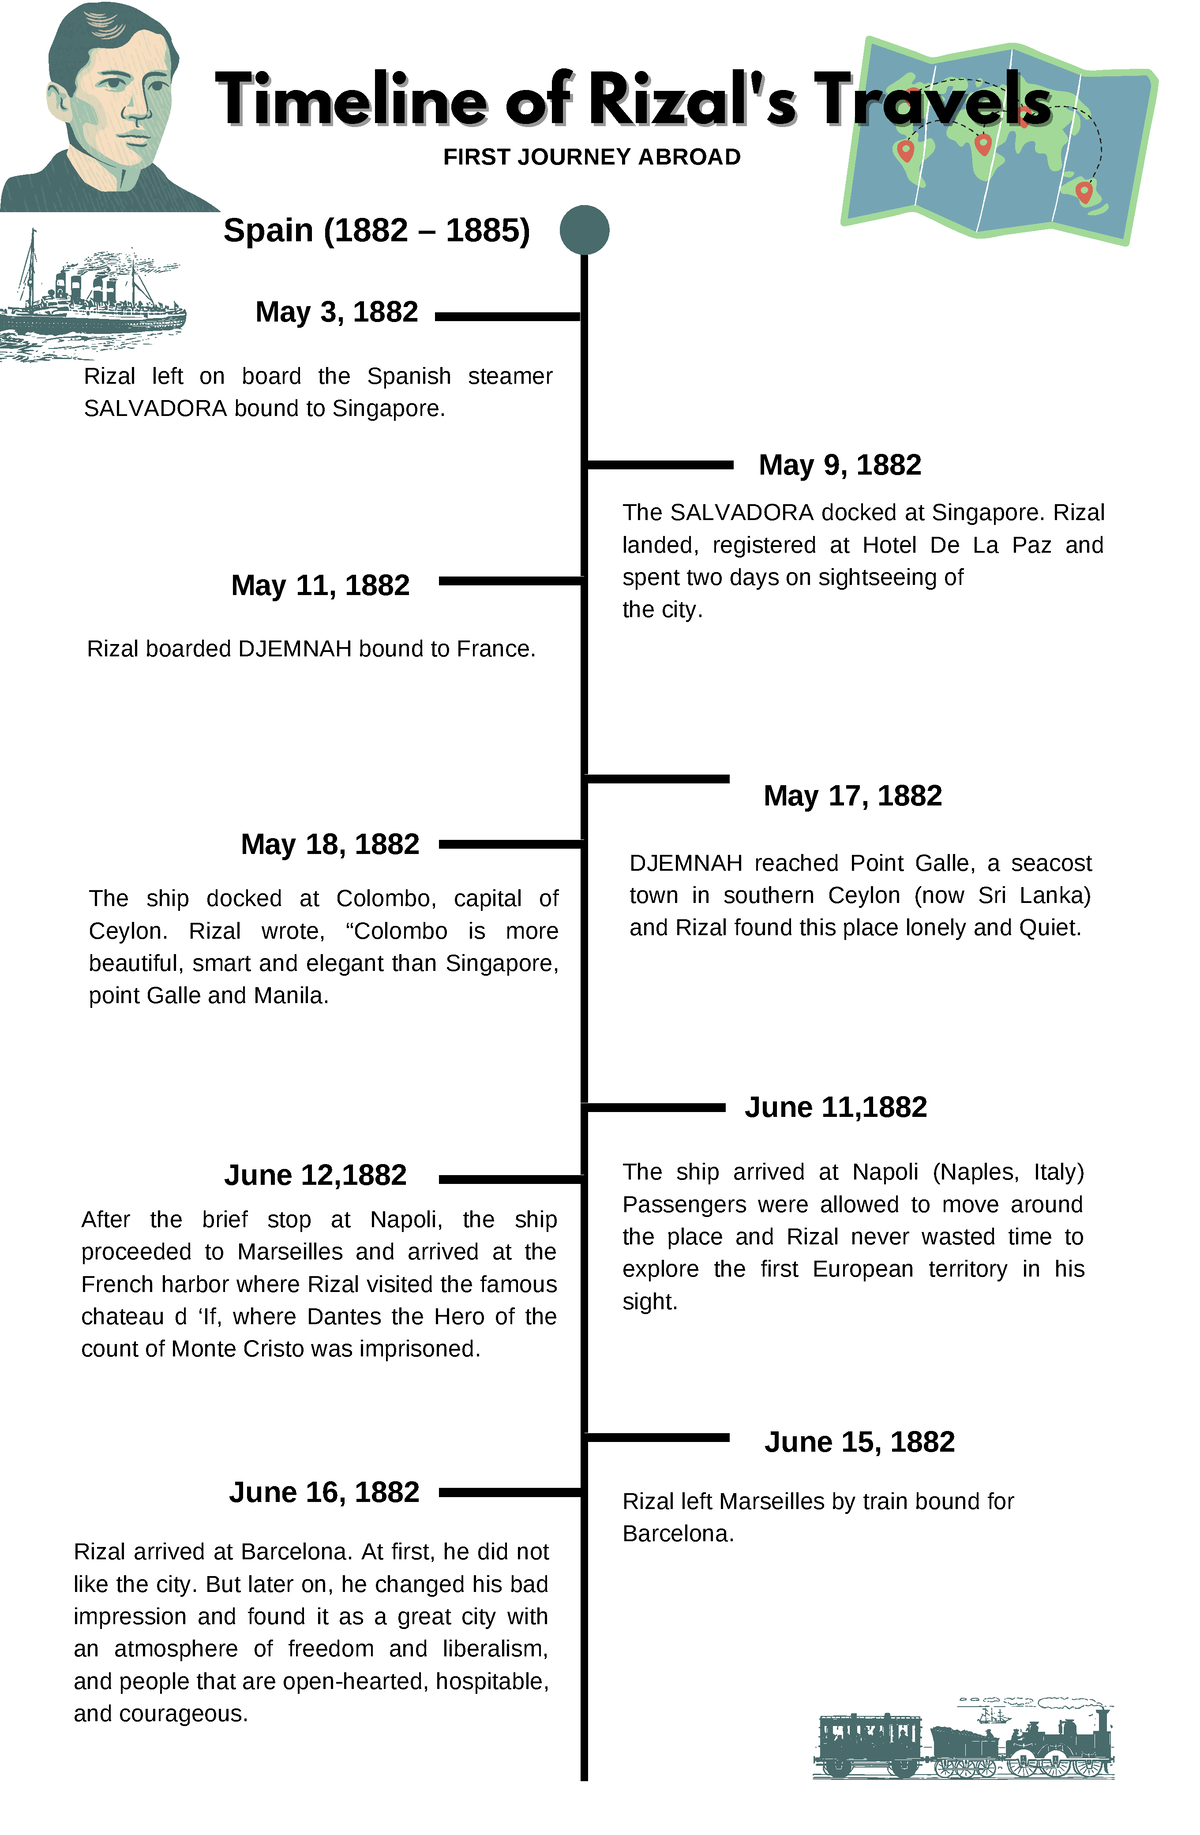 first travel of rizal timeline